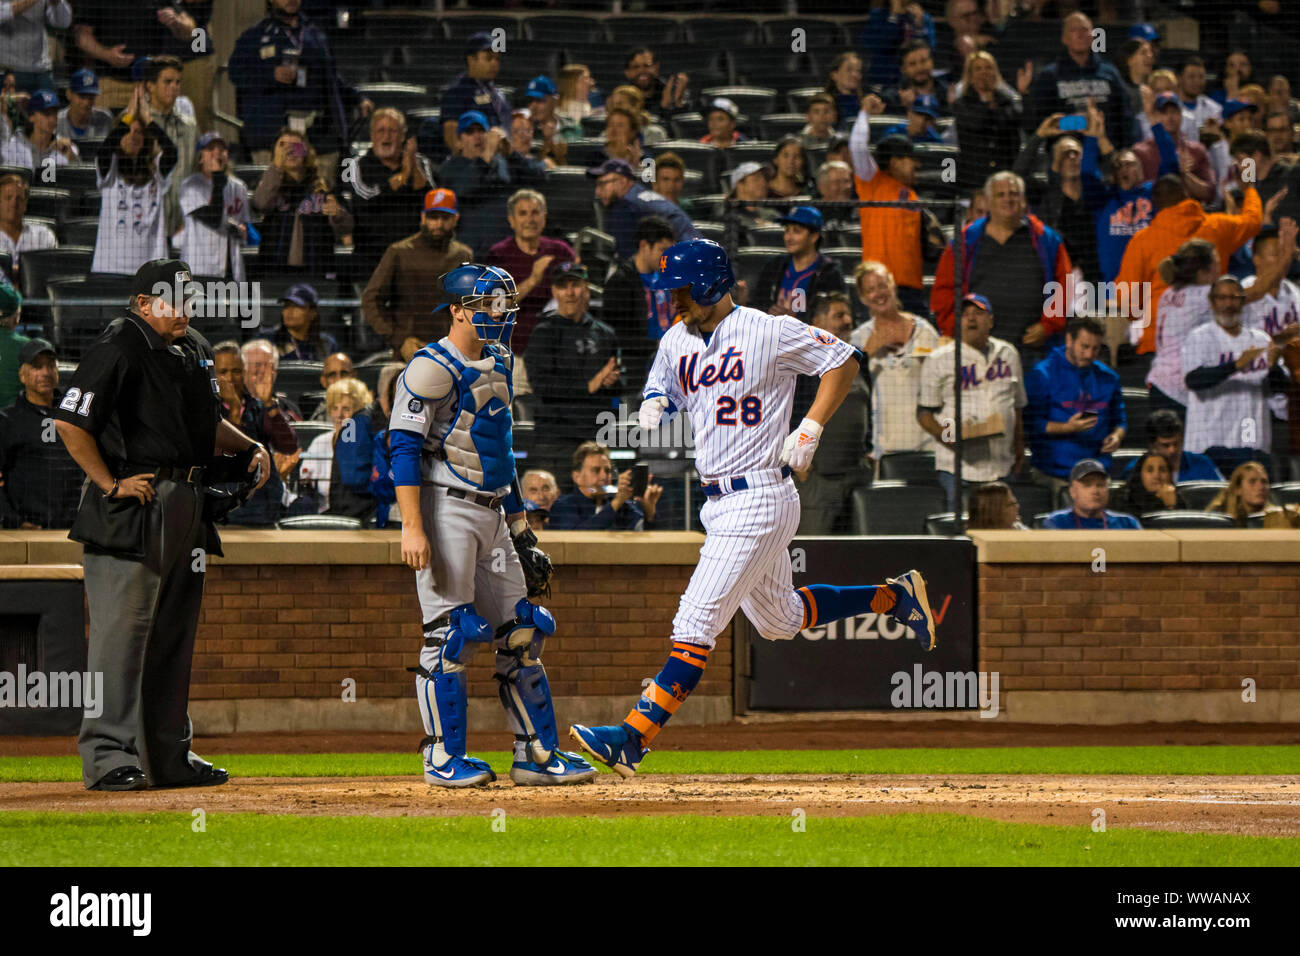 Queens, New York, USA. 13th Sep, 2019. New York Mets third baseman J.D. Davis (28) rounds home plate after hitting a home run during the game between The New York Mets and The Los Angeles Dodgers at Citi Field in Queens, New York. Mandatory credit: Kostas Lymperopoulos/CSM/Alamy Live News Stock Photo